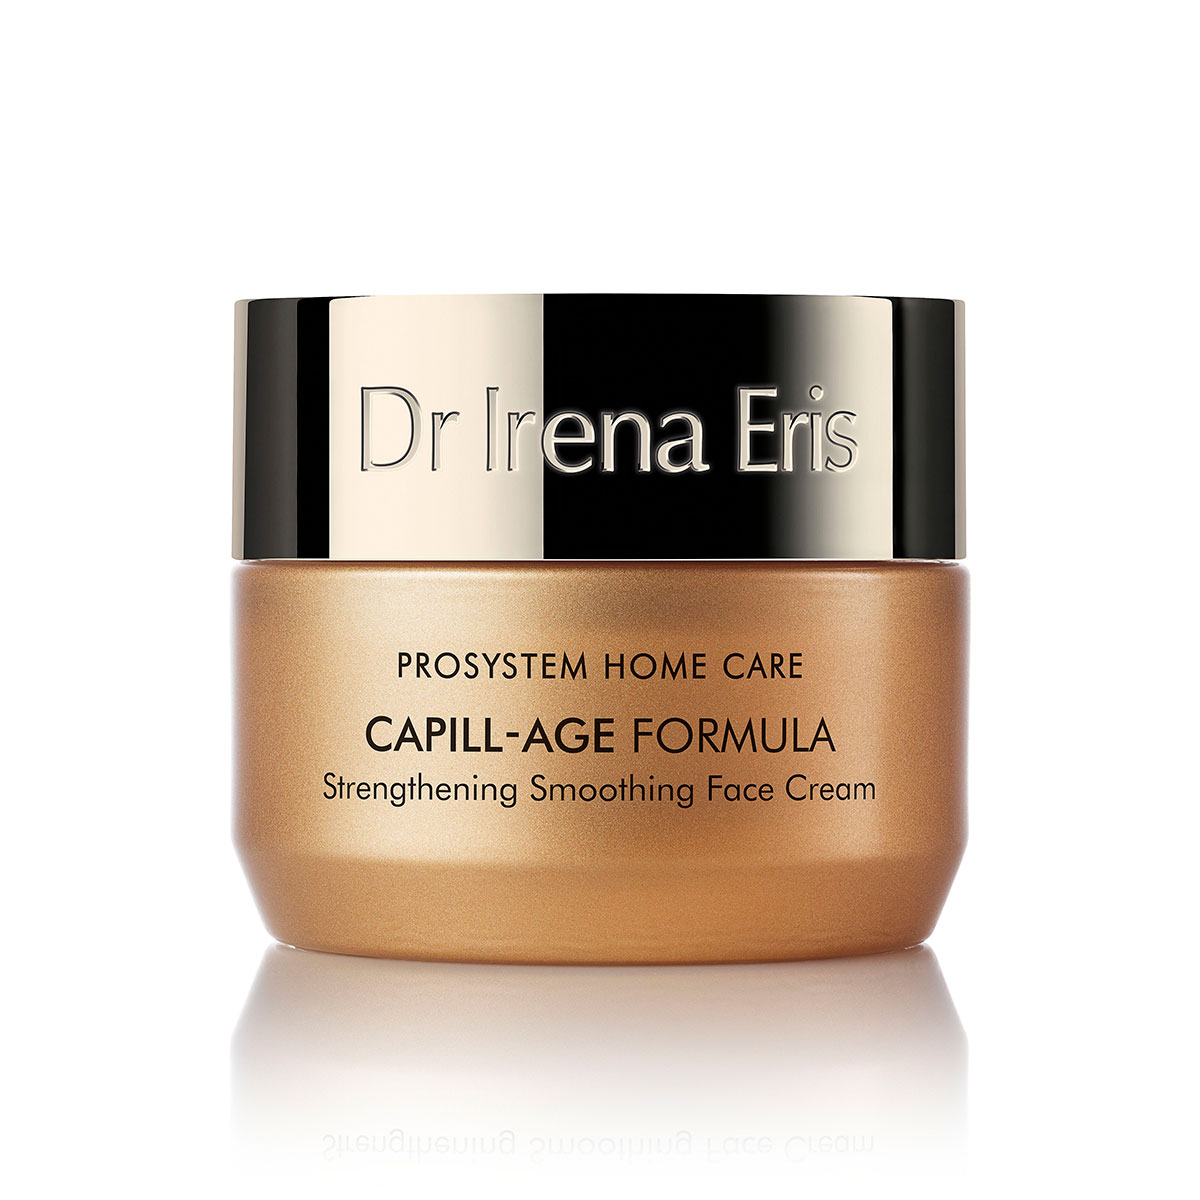  CAPILLAR-AGE FORMULA Strengthening and Smoothing Face Day Cream SPF 20 851
